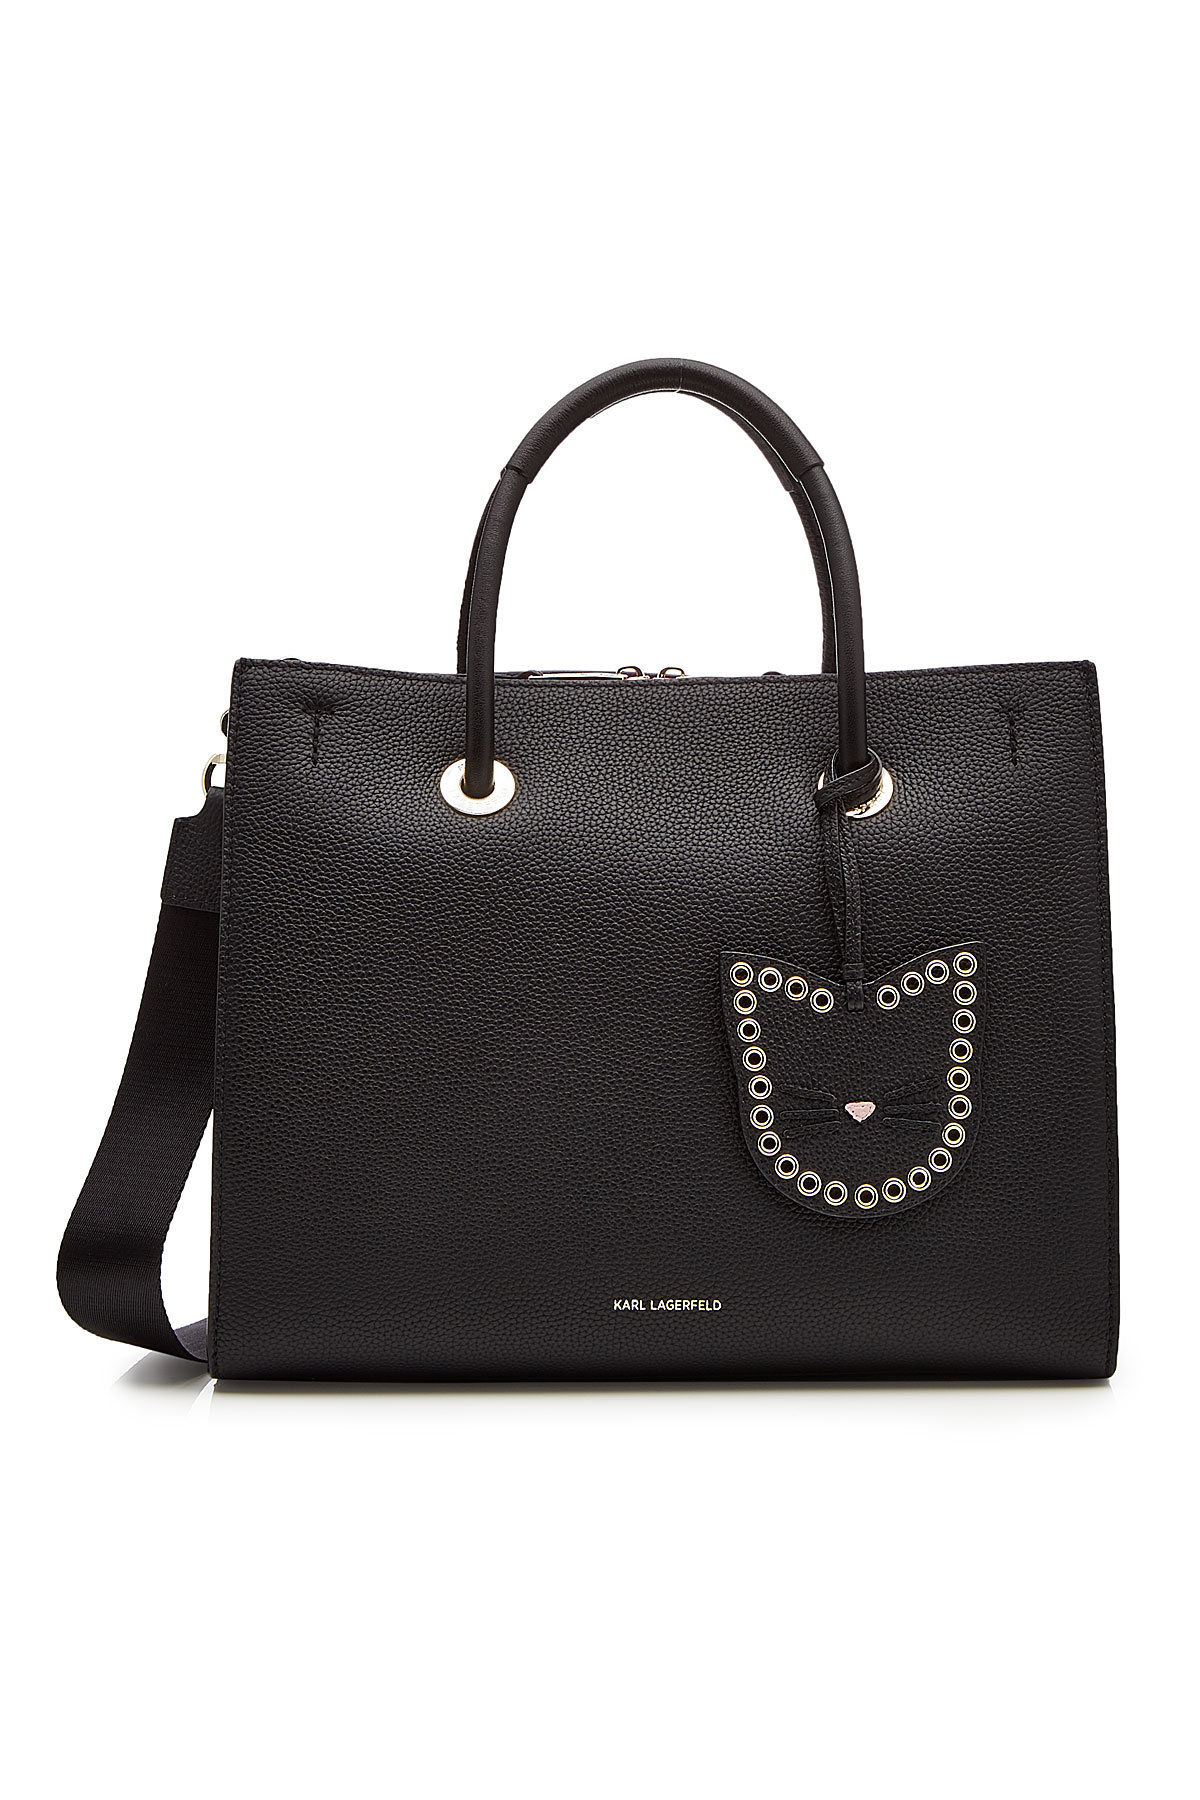 K/Karry Leather Tote by Karl Lagerfeld